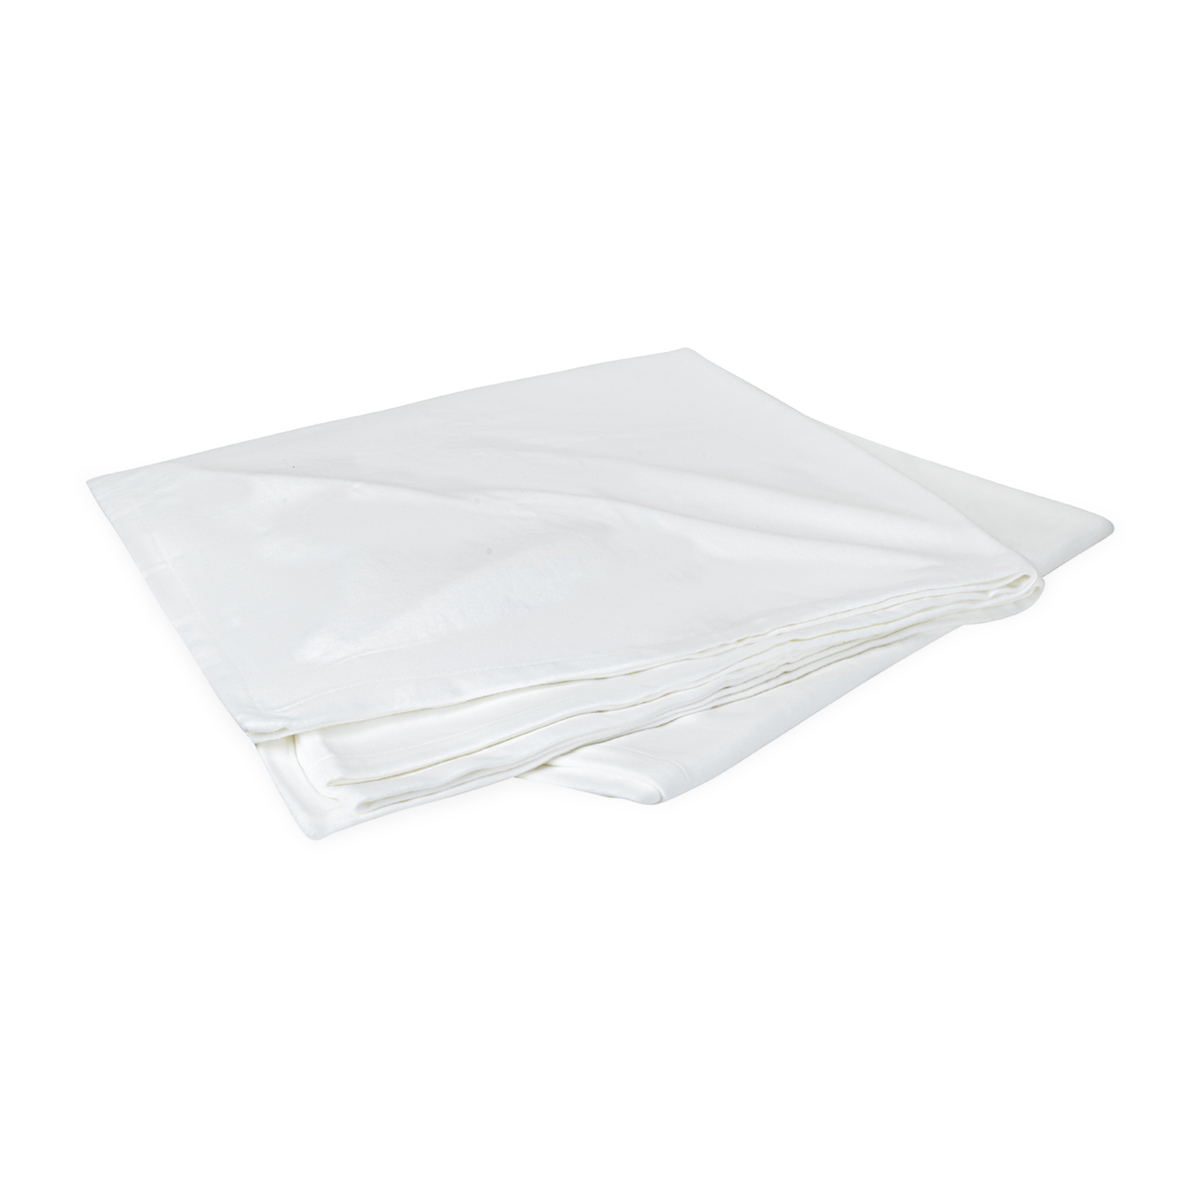 Folded Throw of Matouk Dream Modal Collection in White Color